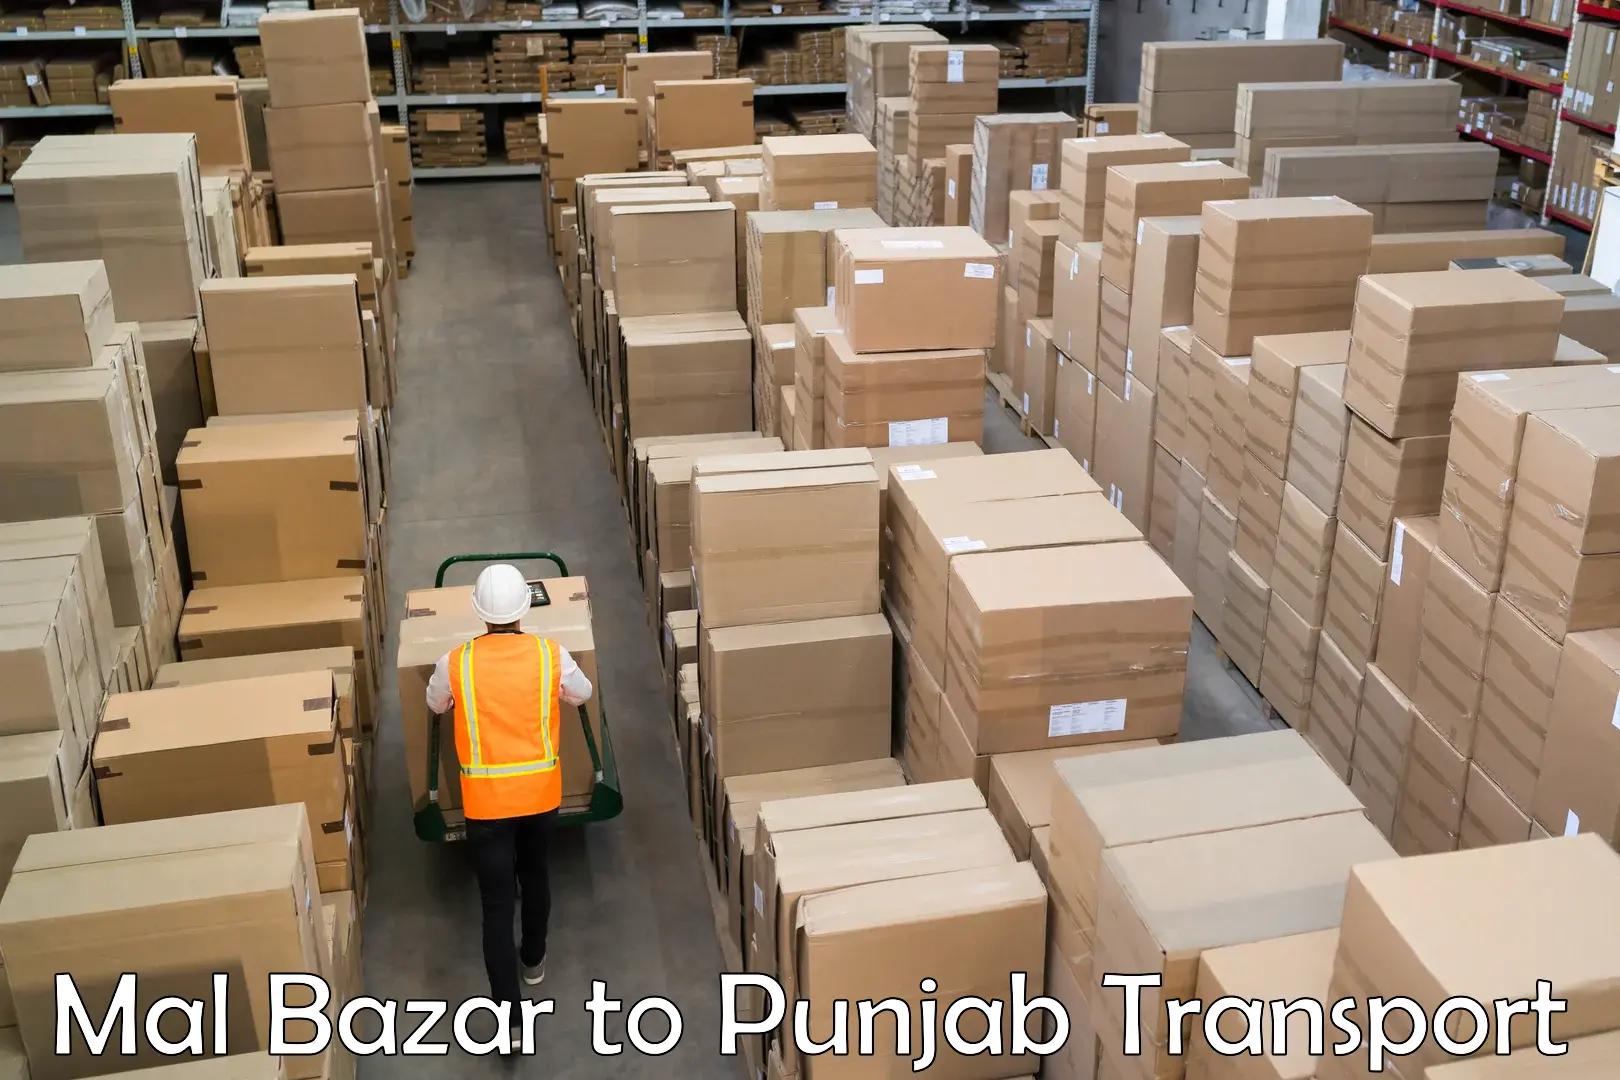 Container transport service Mal Bazar to Patiala